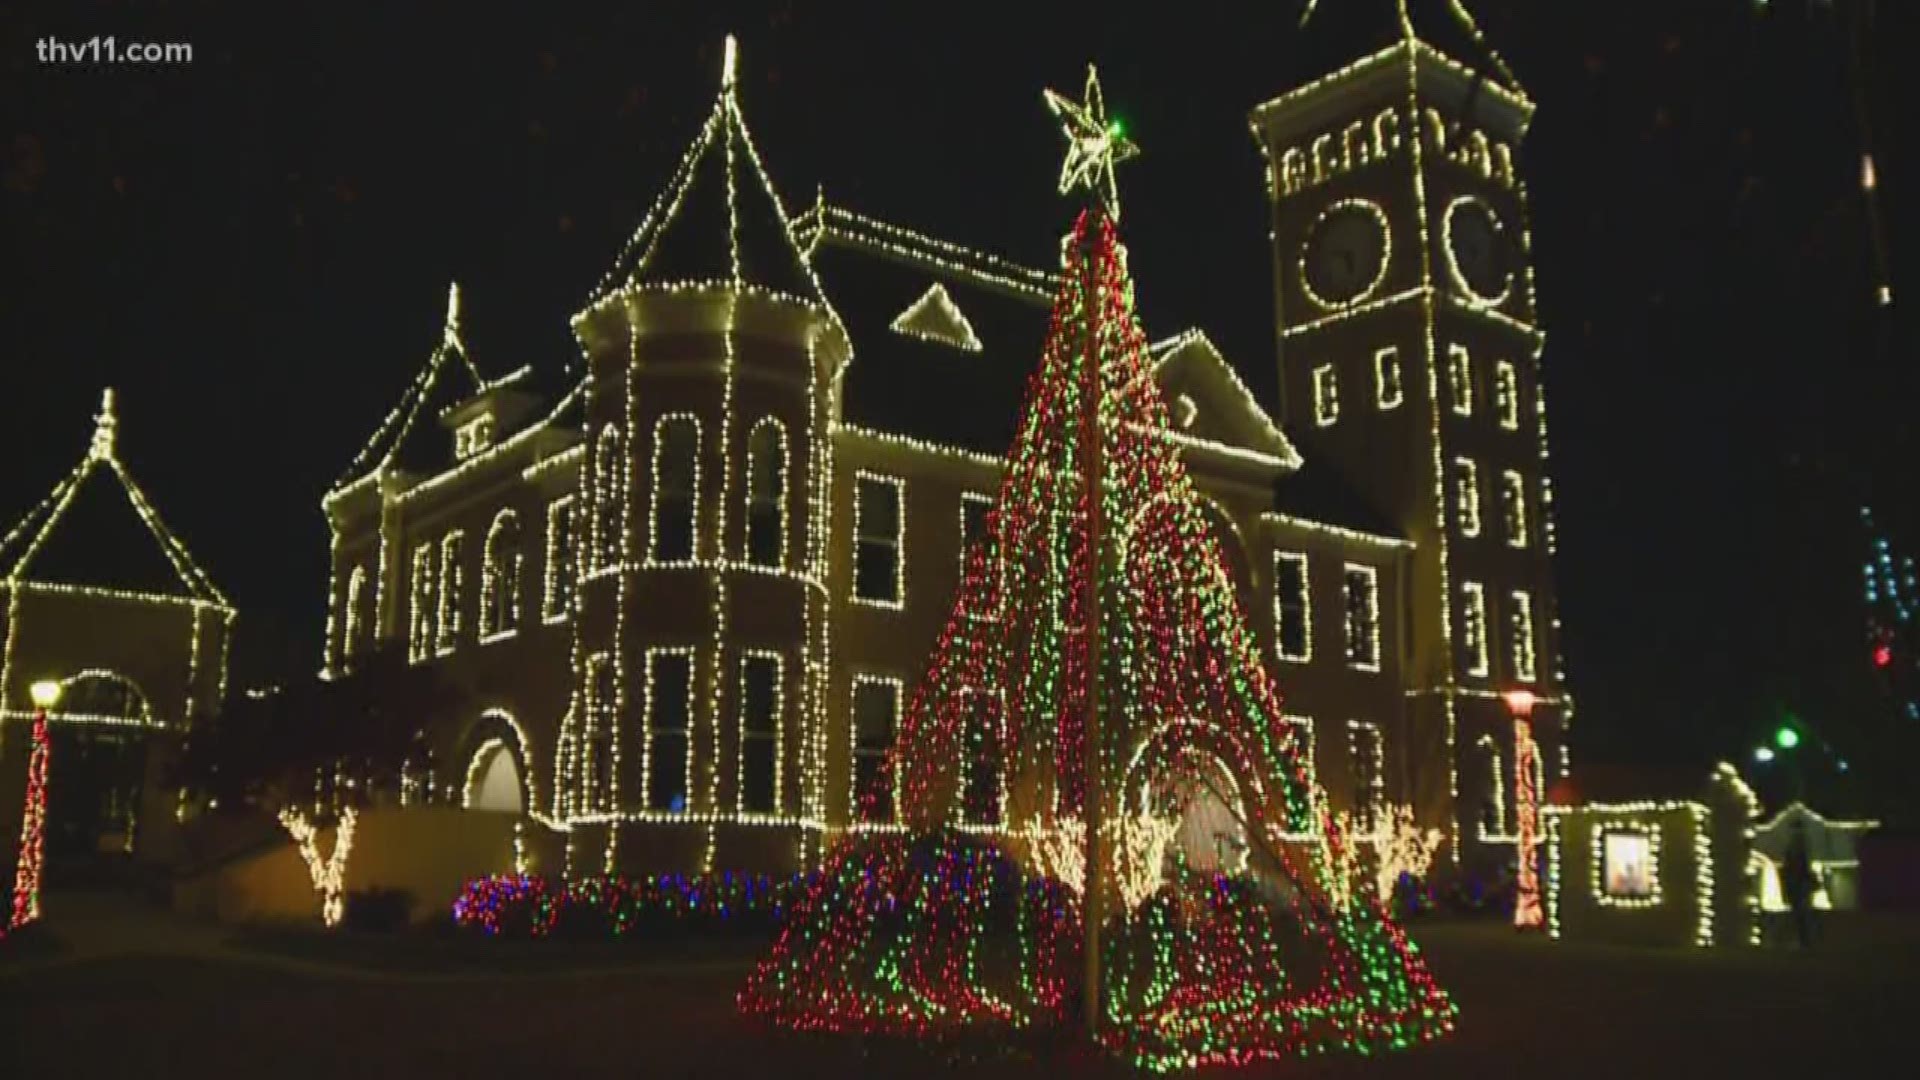 A Grinch isn't stopping Christmas this year in Saline County, but they did get away with some lights used in the annual courthouse display.